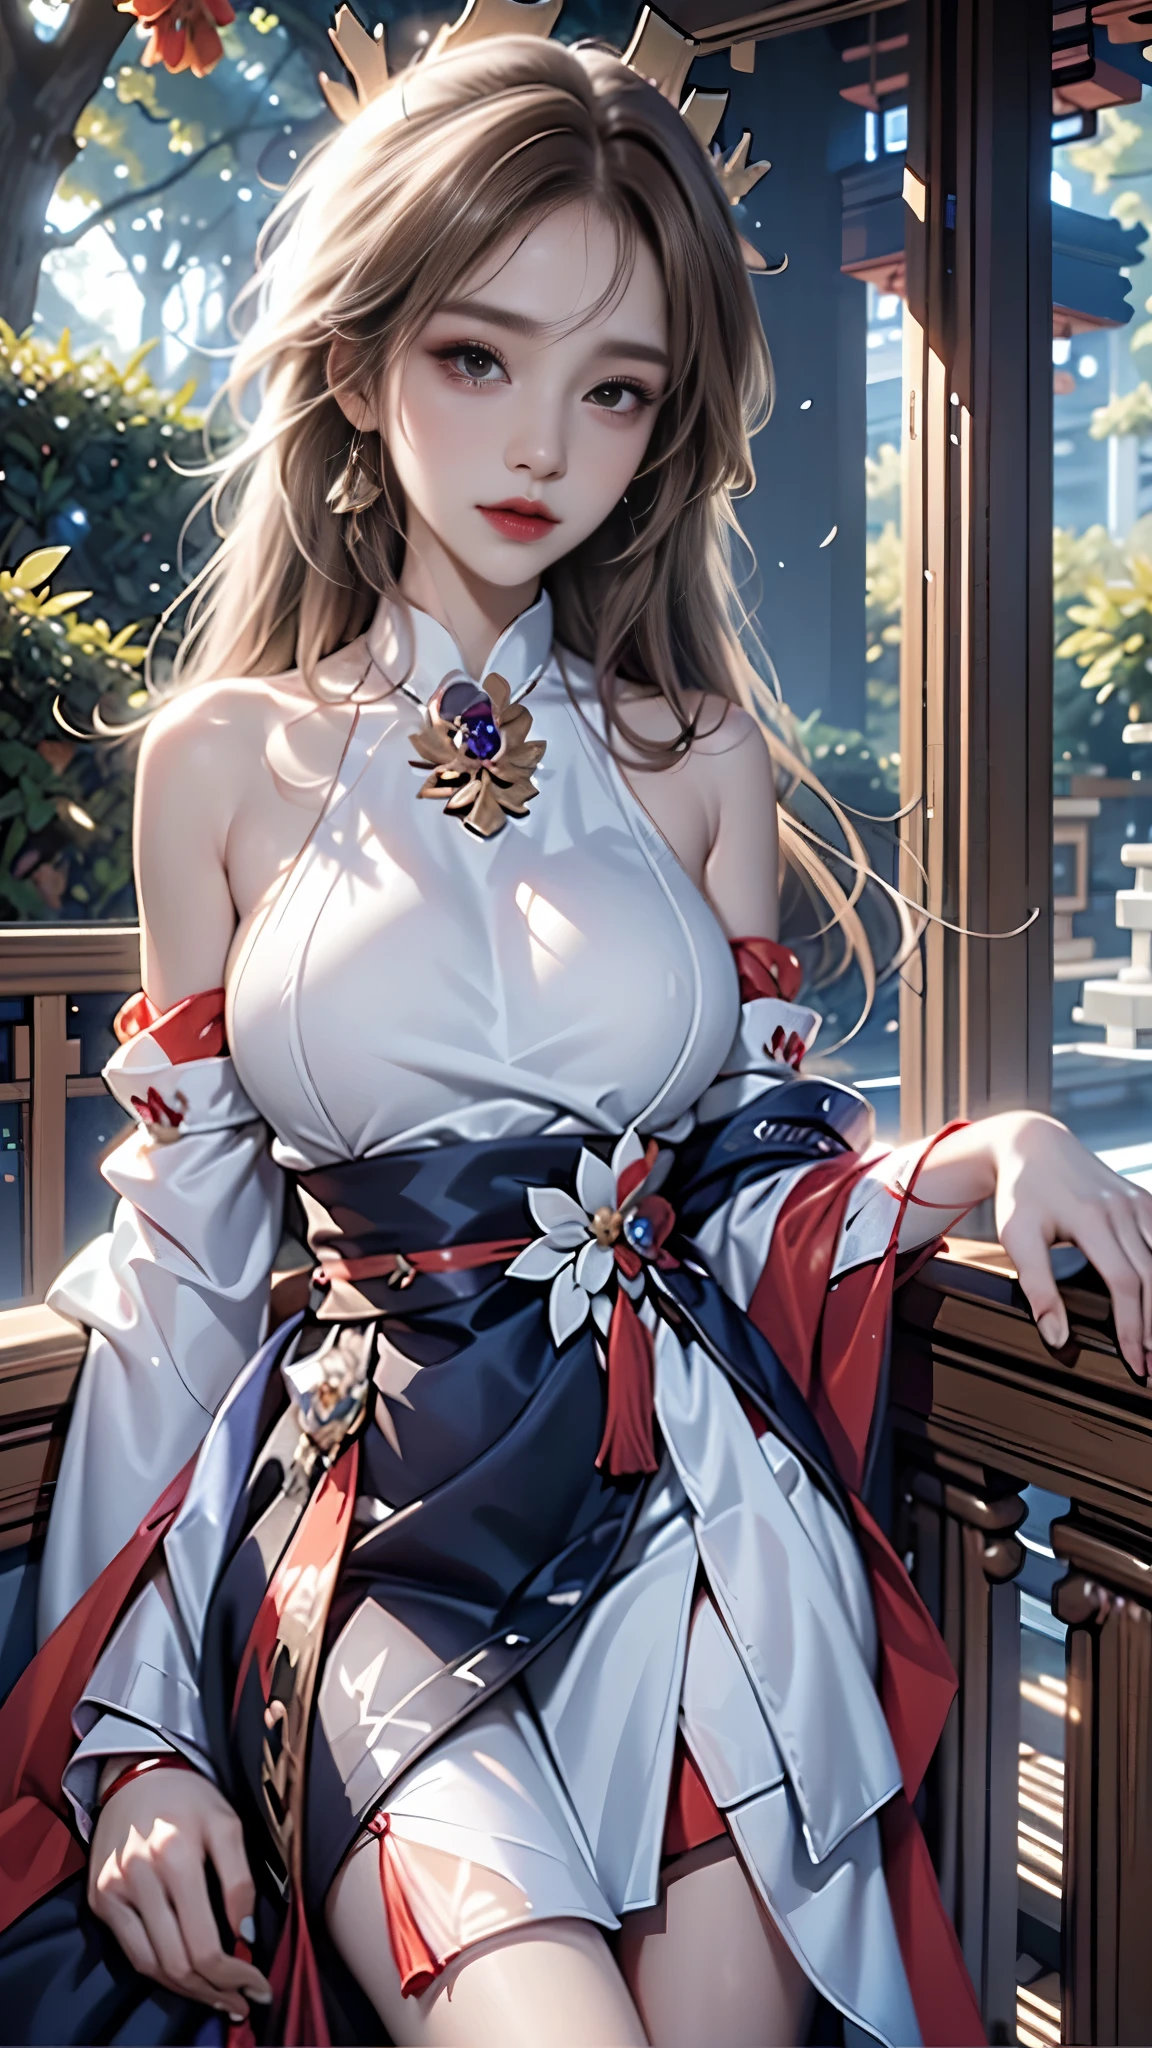 yae_miko, masterpiece，best quality，high quality，High definition，high quality的纹理，high quality的阴影，High details，beautiful details，fine details，Extremely detailed CG，Detailed texture，lifelike面部表现，lifelike，rich and colorful，exquisite，sharp focus，(intricate detailake up，pureerosface_v1:0.5)，(Beautiful details, exquisite face，(Beautiful details, exquisite eyes)，Perfectly proportioned face，highDetails of the skin，Details of the skin，Four fingers and one thumb in optimal proportions，emaciated:1.3)，1 girl，17 years old，high，(Smooth abs:1.55)，pretty，Perfect，high，((bare shoulders)), ((The skirt is short)), (long legs)，(straight legs)，(thin waist)，((White skin))，White skin，((White skin))，(emma watson)，Big breasts，((Caucasian))，light blonde hair，Stand with legs apart，looking at the audience，whole body，Portrait of cute blonde girl，((Cherry tree)), ((Standing under the cherry tree,Look into the distance))，bloom，orange mist，sports，Wisps of hair，lifelike，high quality渲染，amazing art，high quality，film texture，Fujifilm XT3，dream